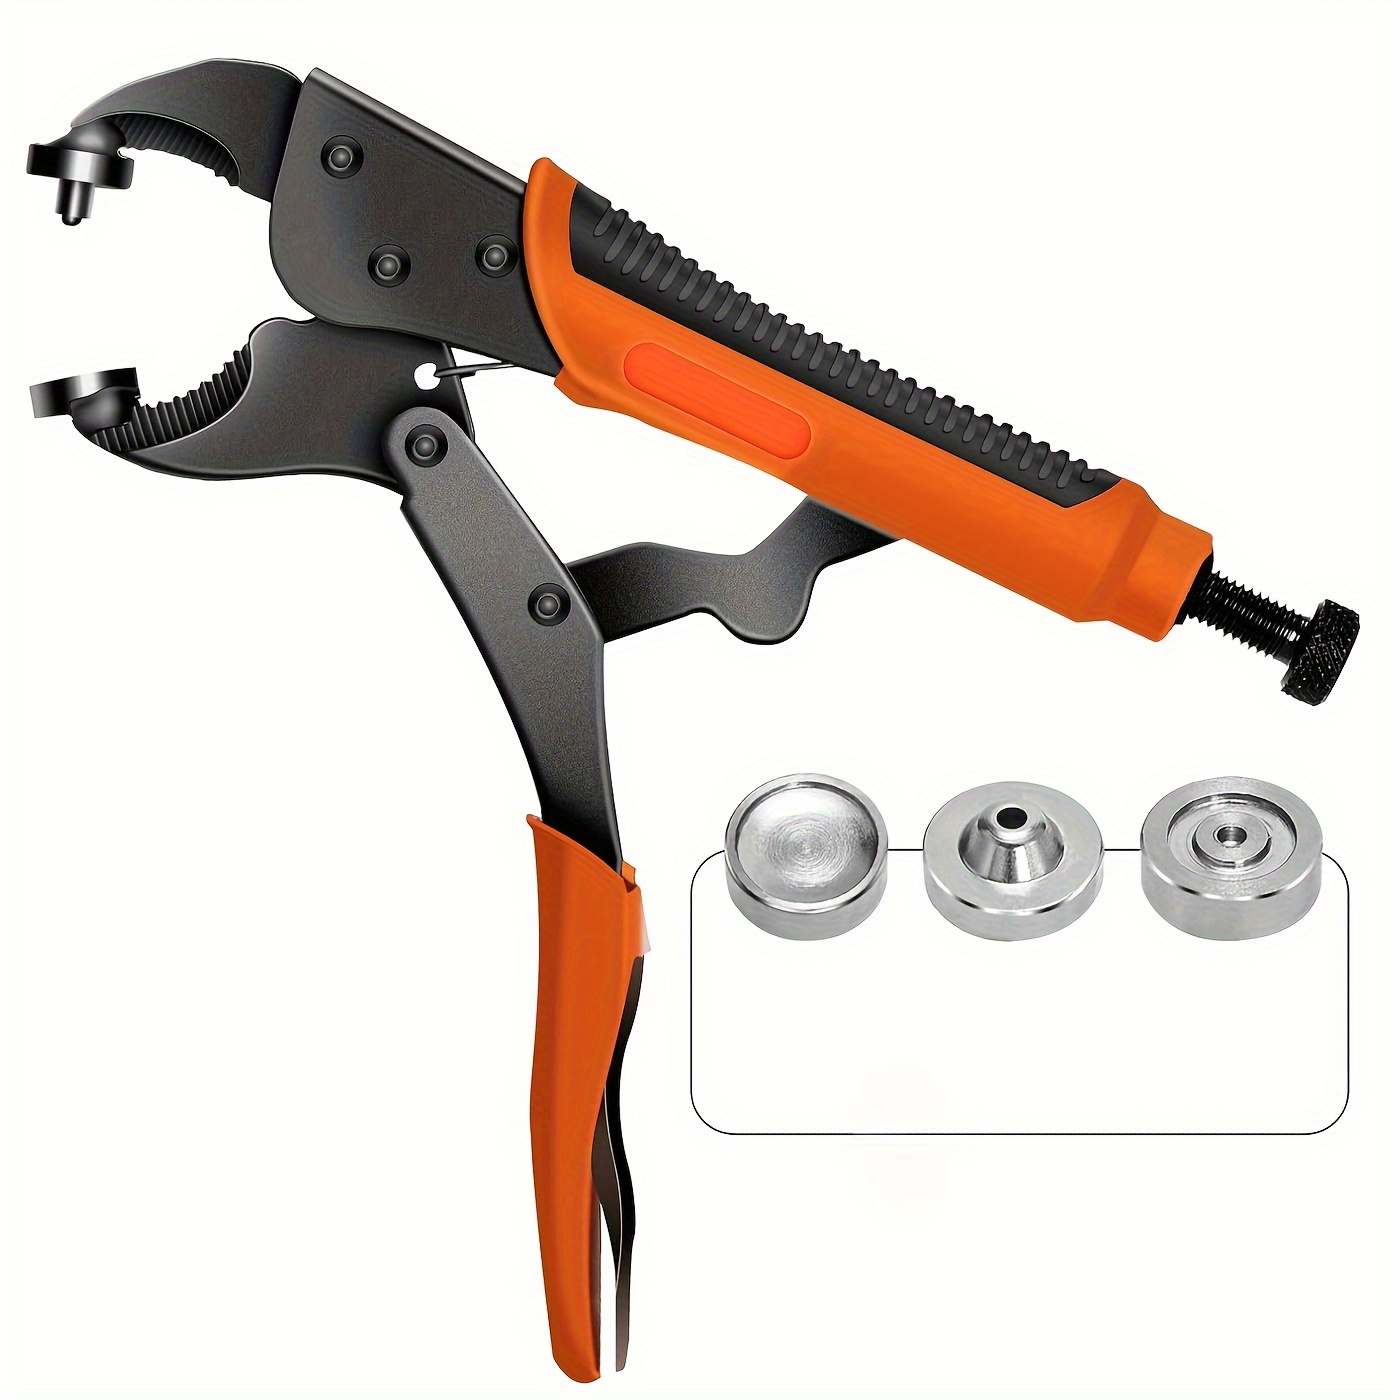 

Heavy-duty Snap Fastener Kit With Adjustable Pliers - Durable Metal Snaps For Canvas, Boat Covers & Tarps - Includes 2 Dies For Secure Installation